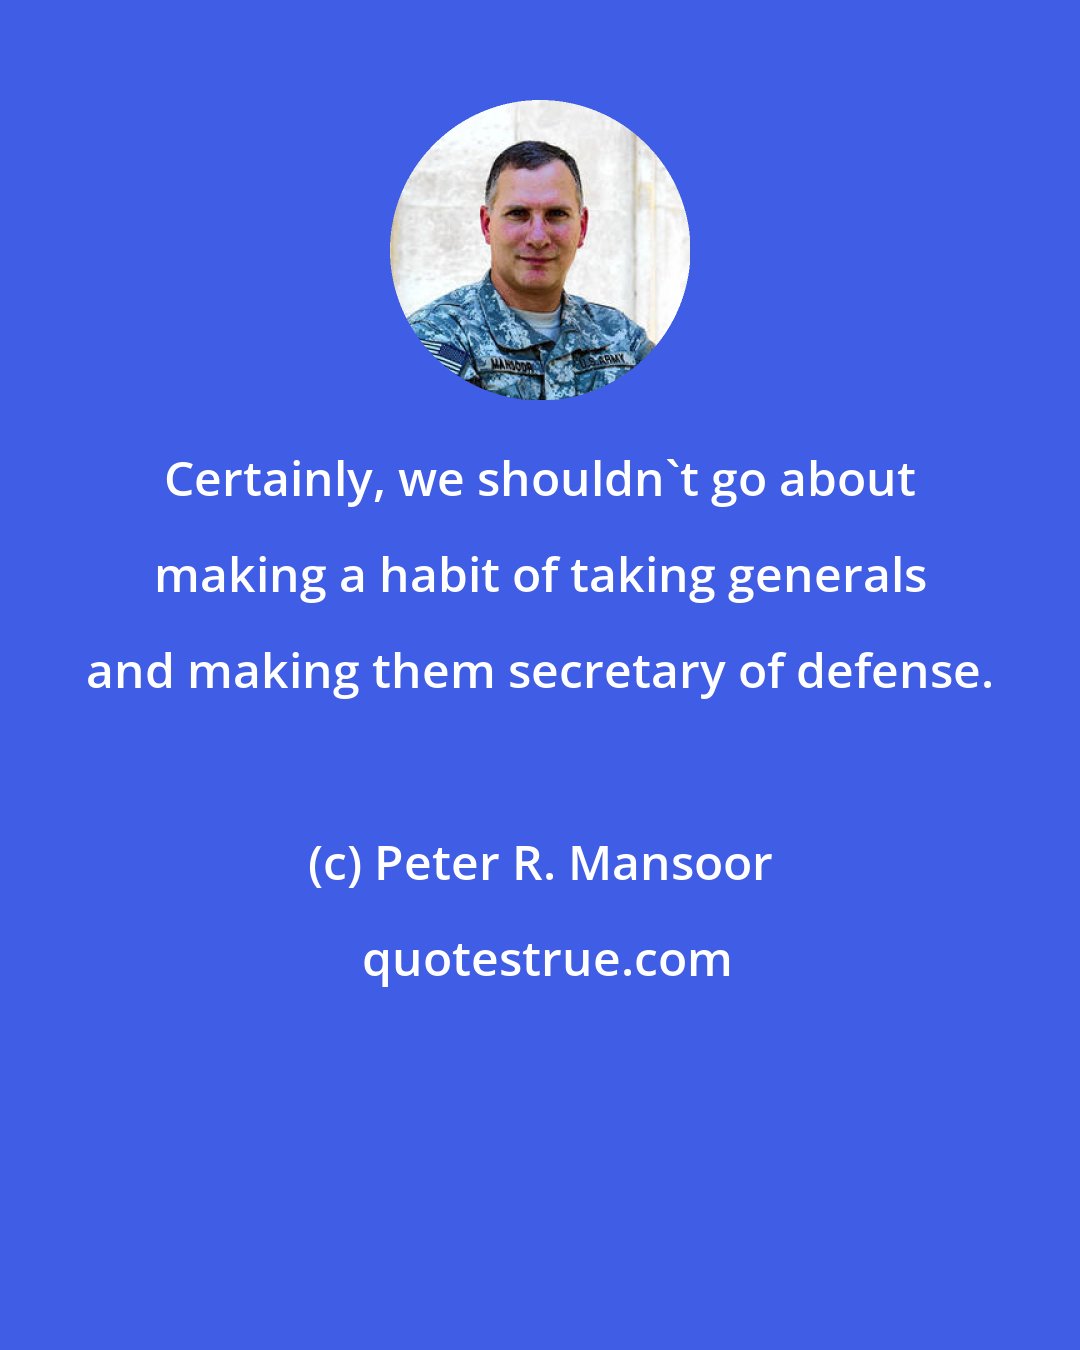 Peter R. Mansoor: Certainly, we shouldn't go about making a habit of taking generals and making them secretary of defense.